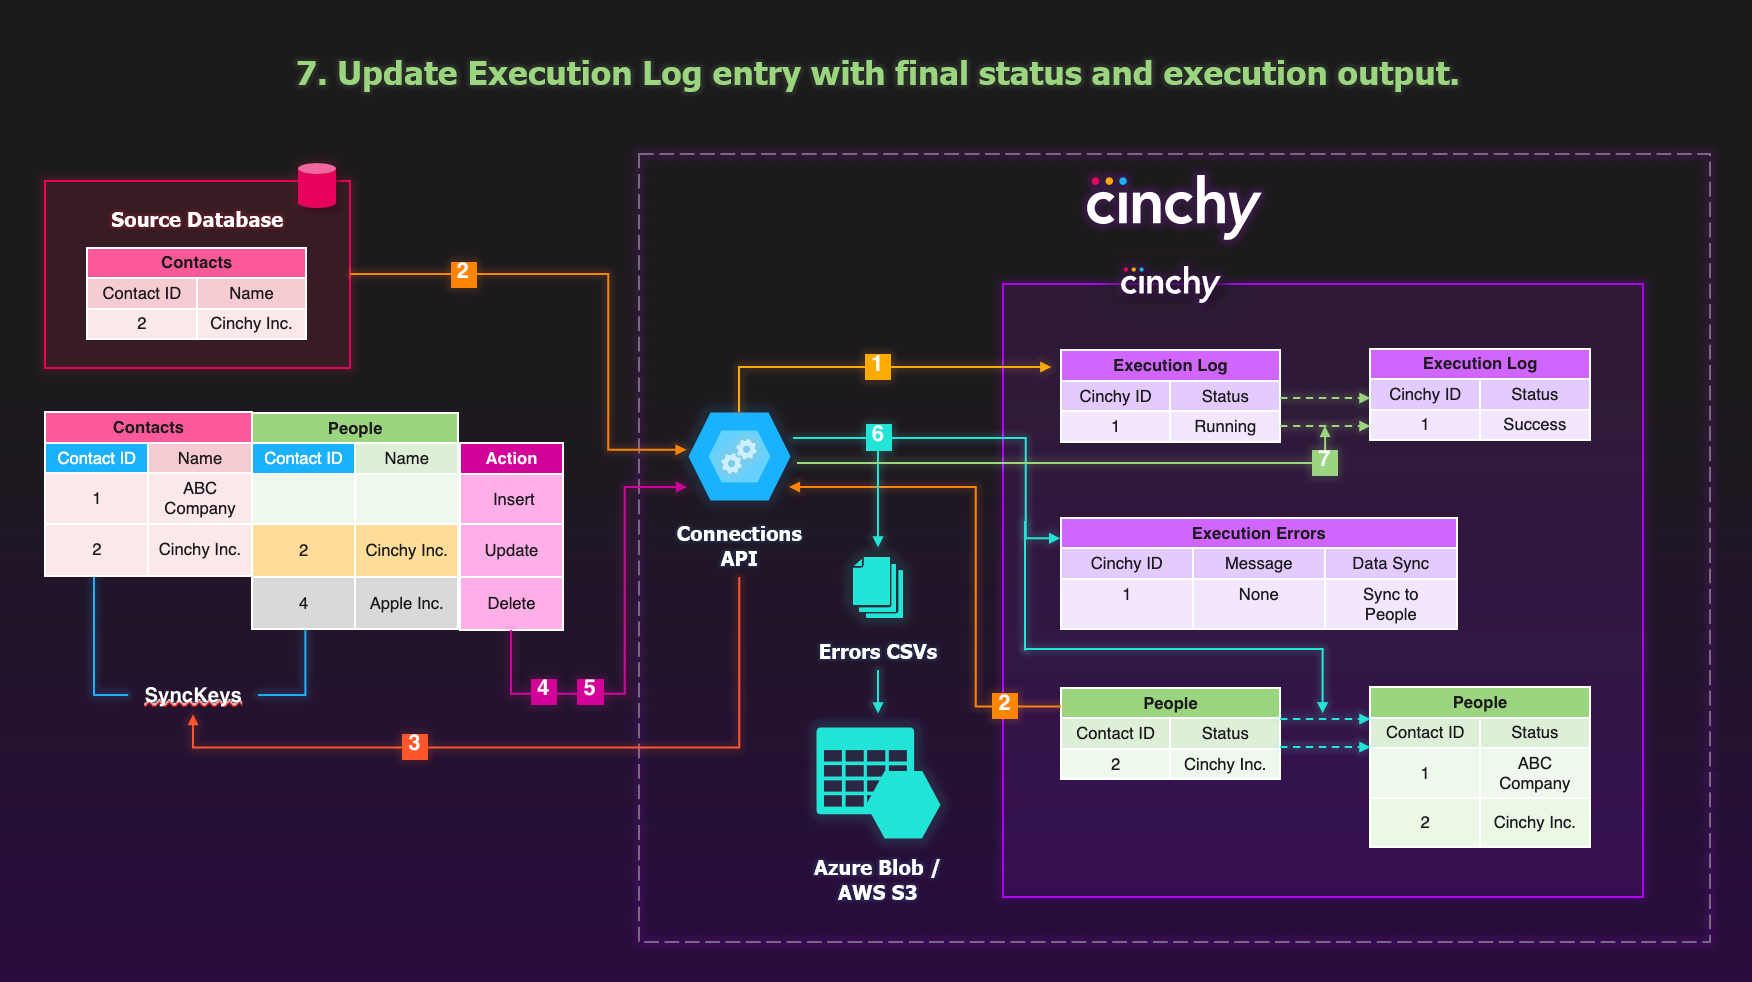 Once complete, it updates Execution Log entry with final status and execution output.